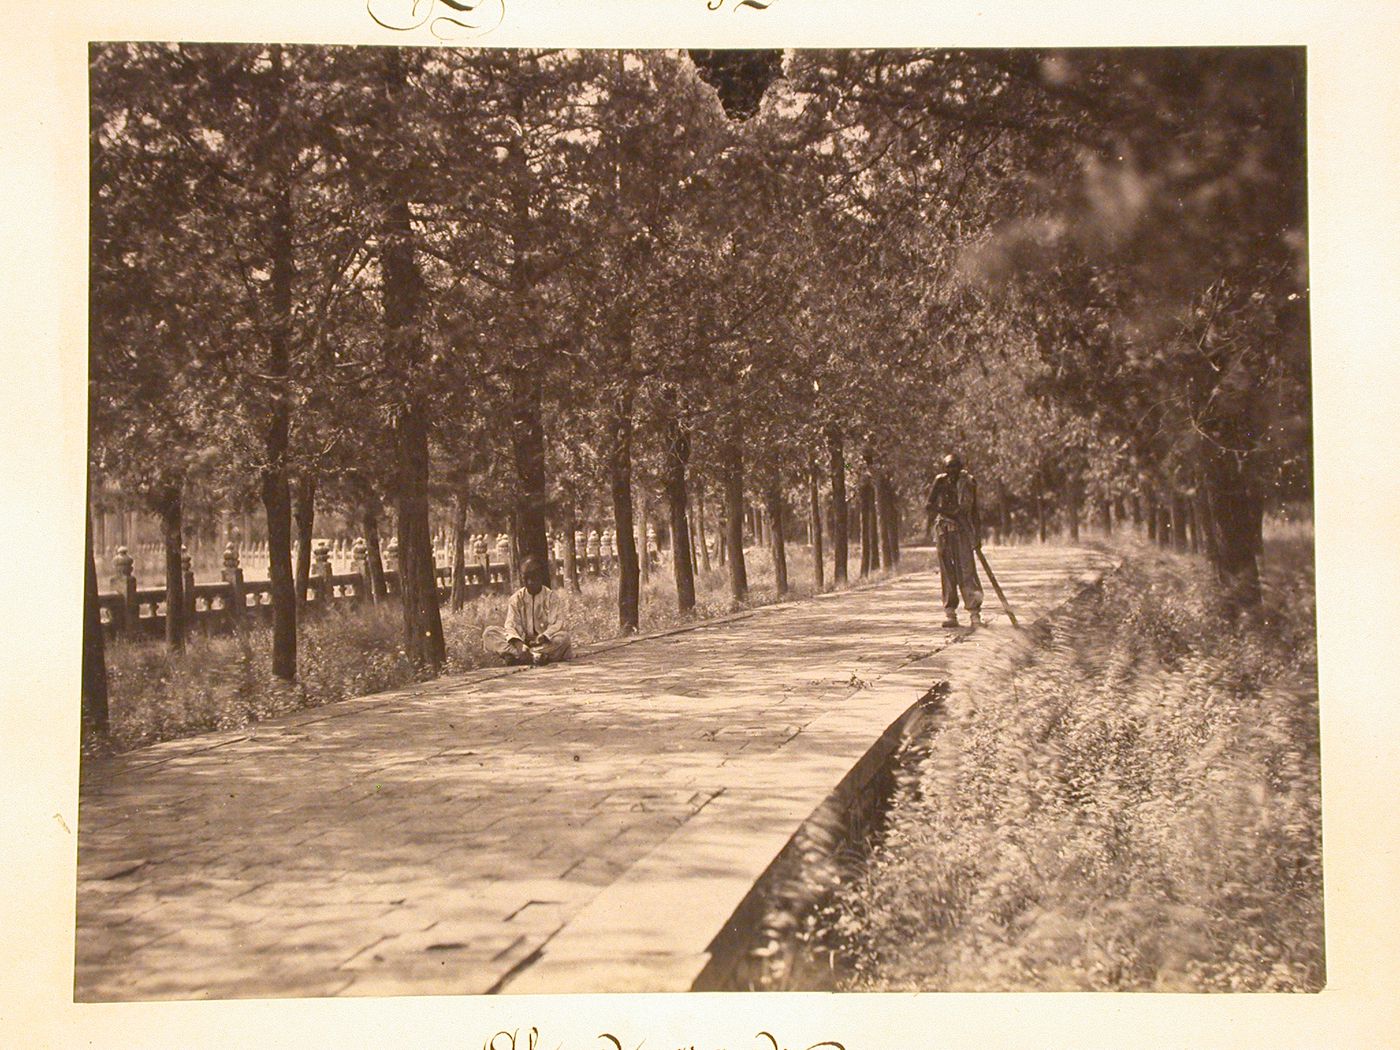 View of a paved walkway in the Garden of the Clear Ripples [Qing Yi Yuan] (now known as the Summer Palace or Yihe Yuan), Peking (now Beijing), China